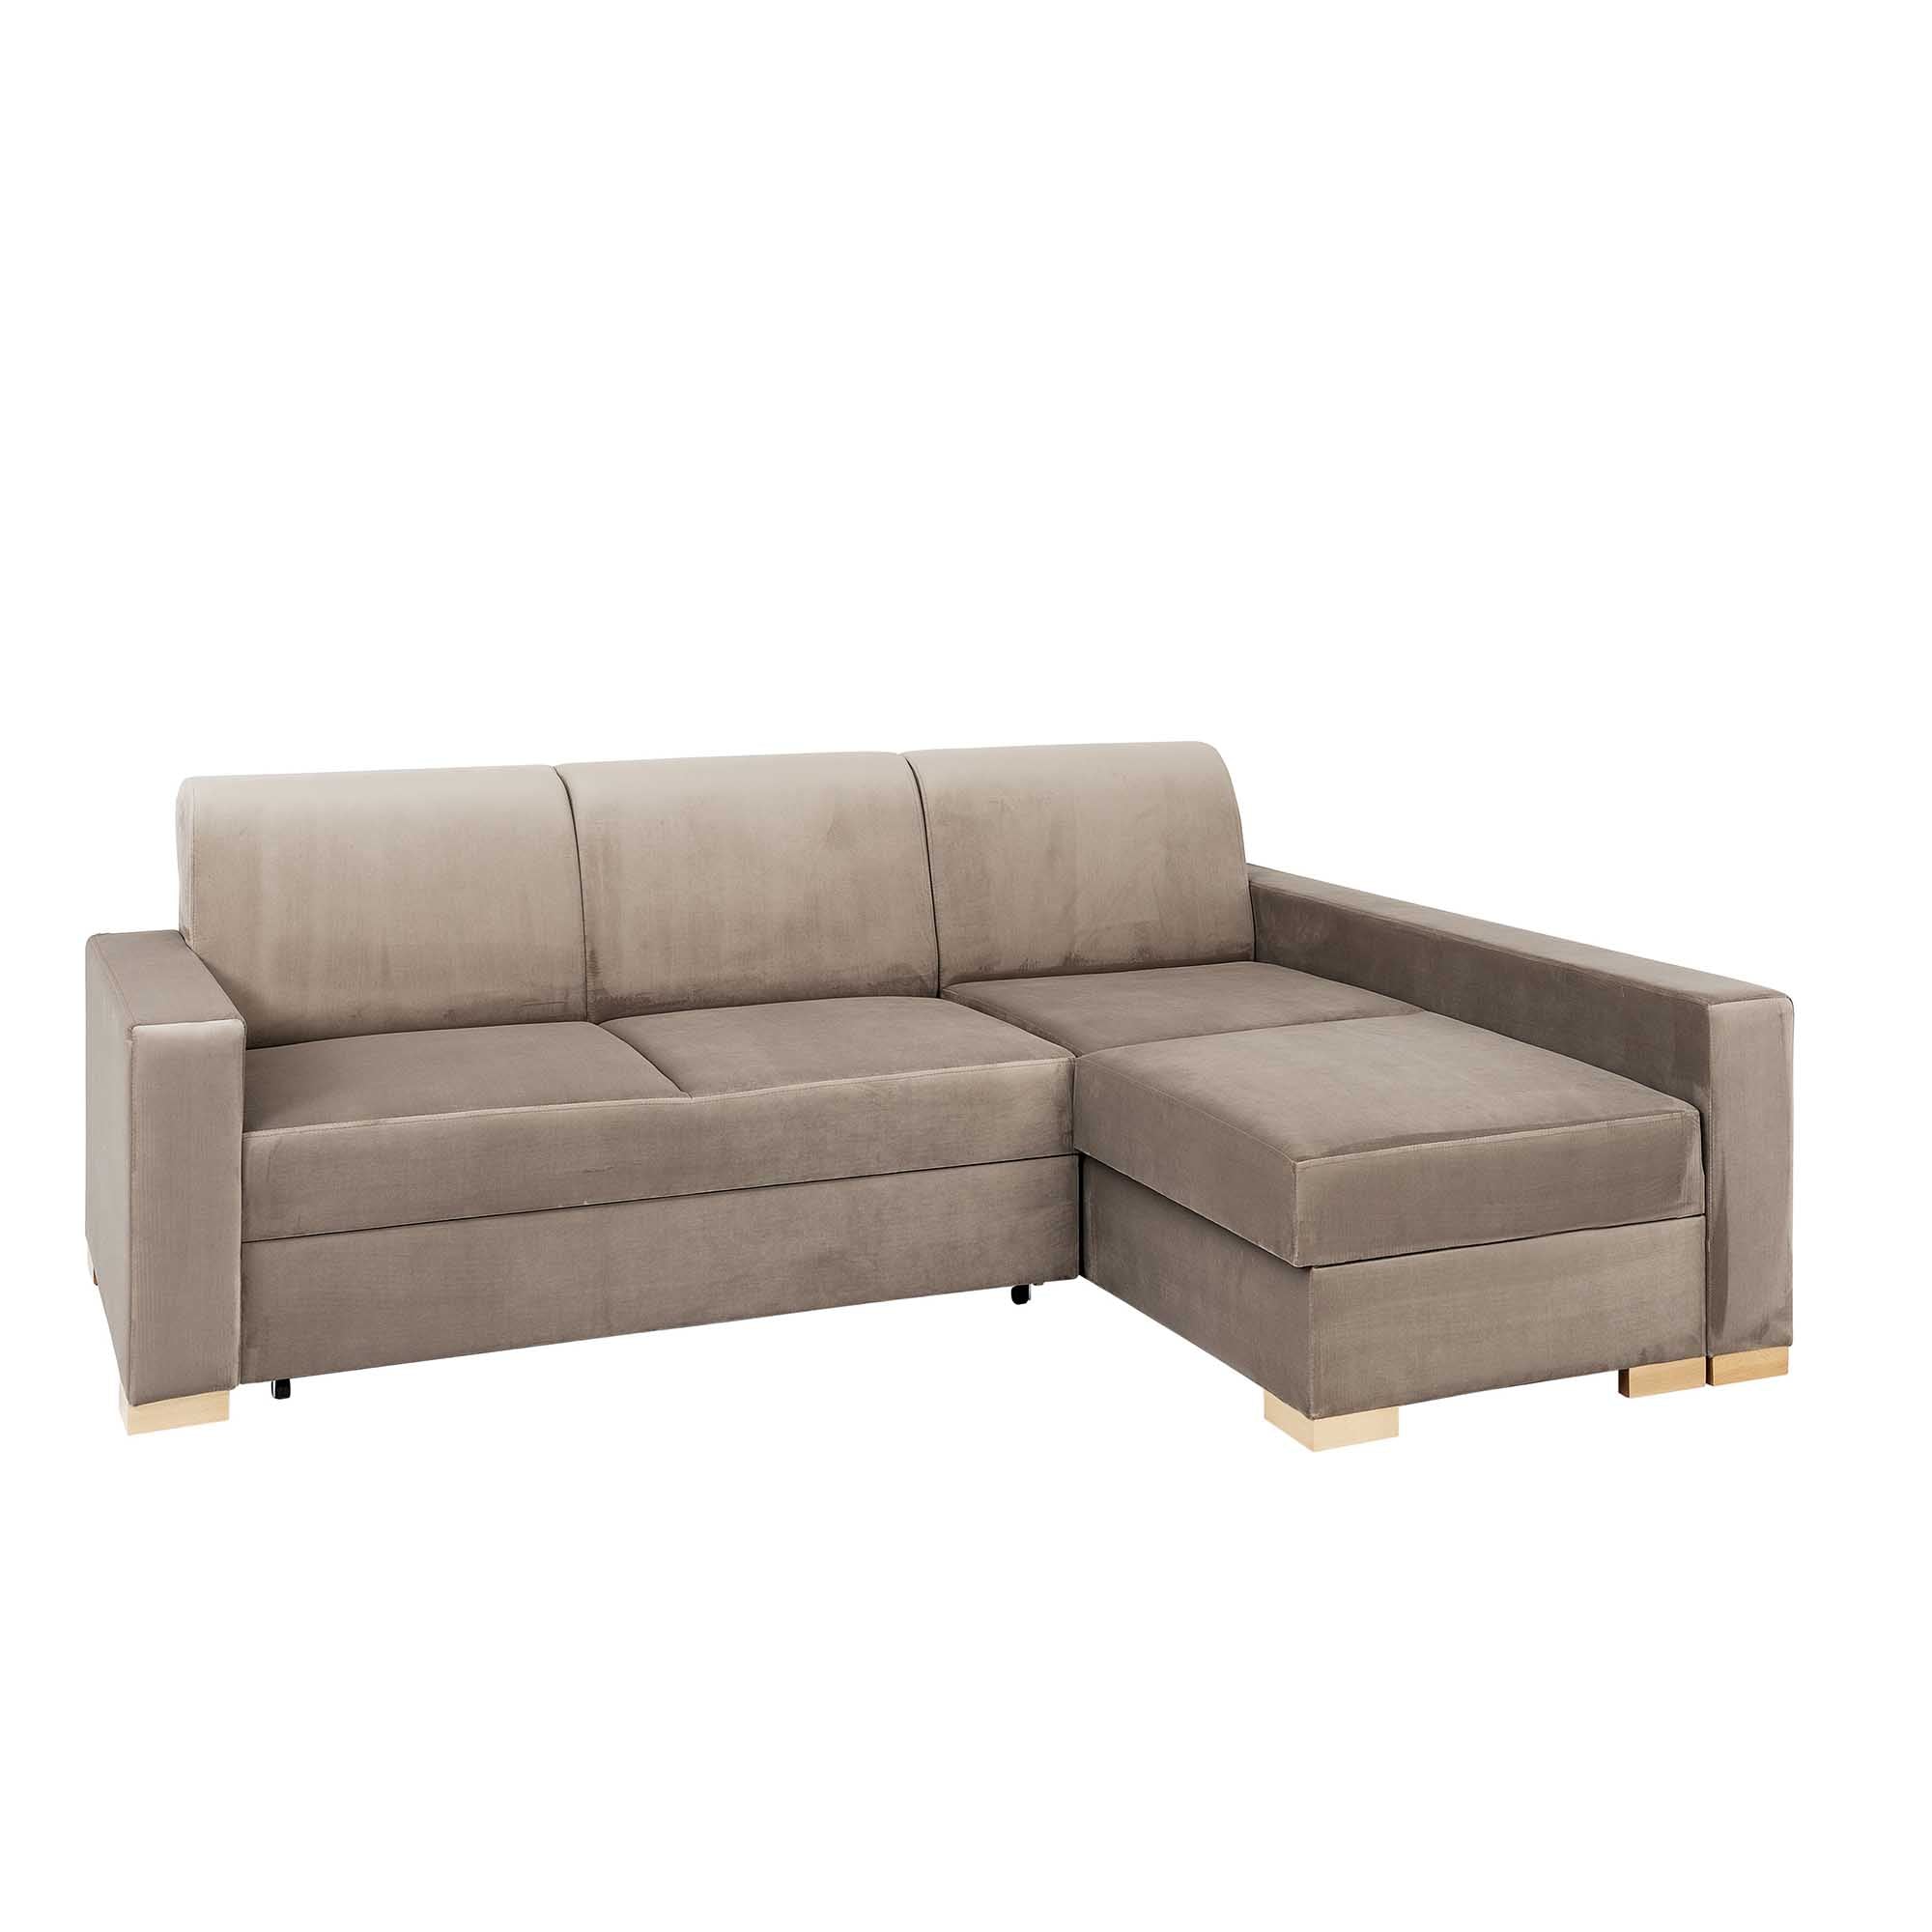 STABLE Corner Sofa Right upholstery colour beige-white background